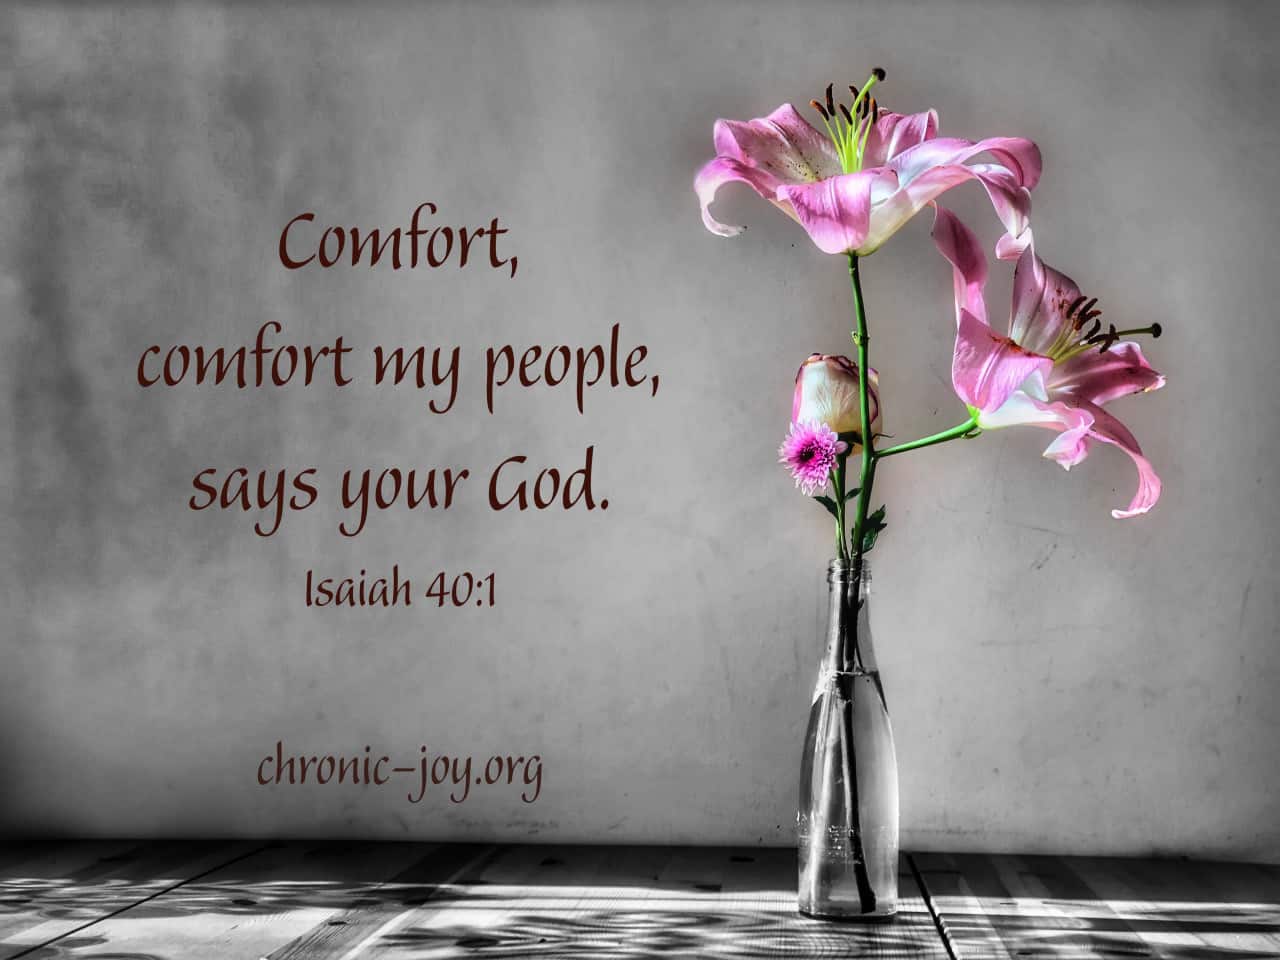 Comfort, comfort my people, says your God.